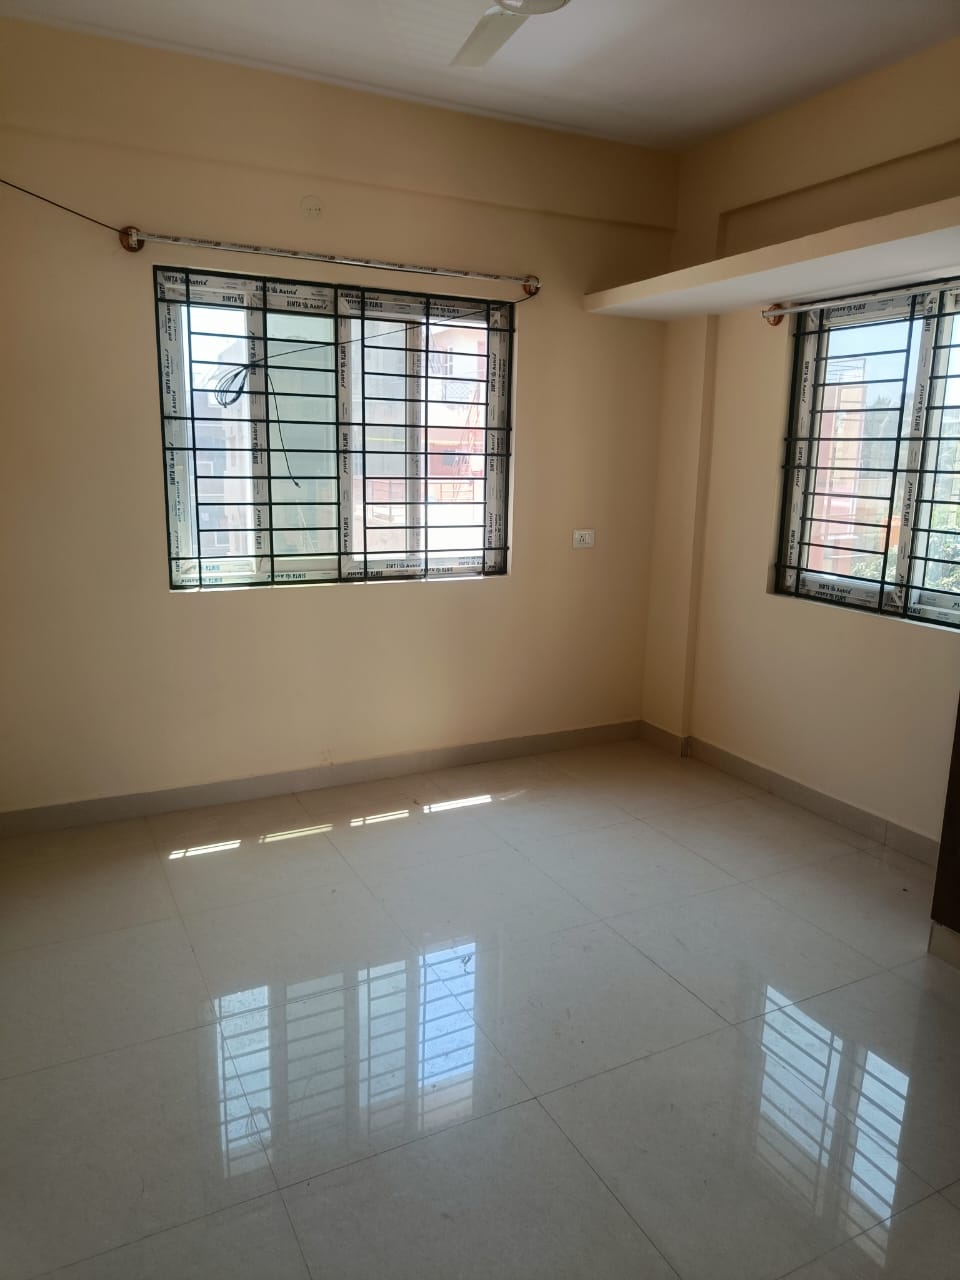 2 BHK Residential Apartment for Lease Only at JAML2 - 2246 in Marathahalli